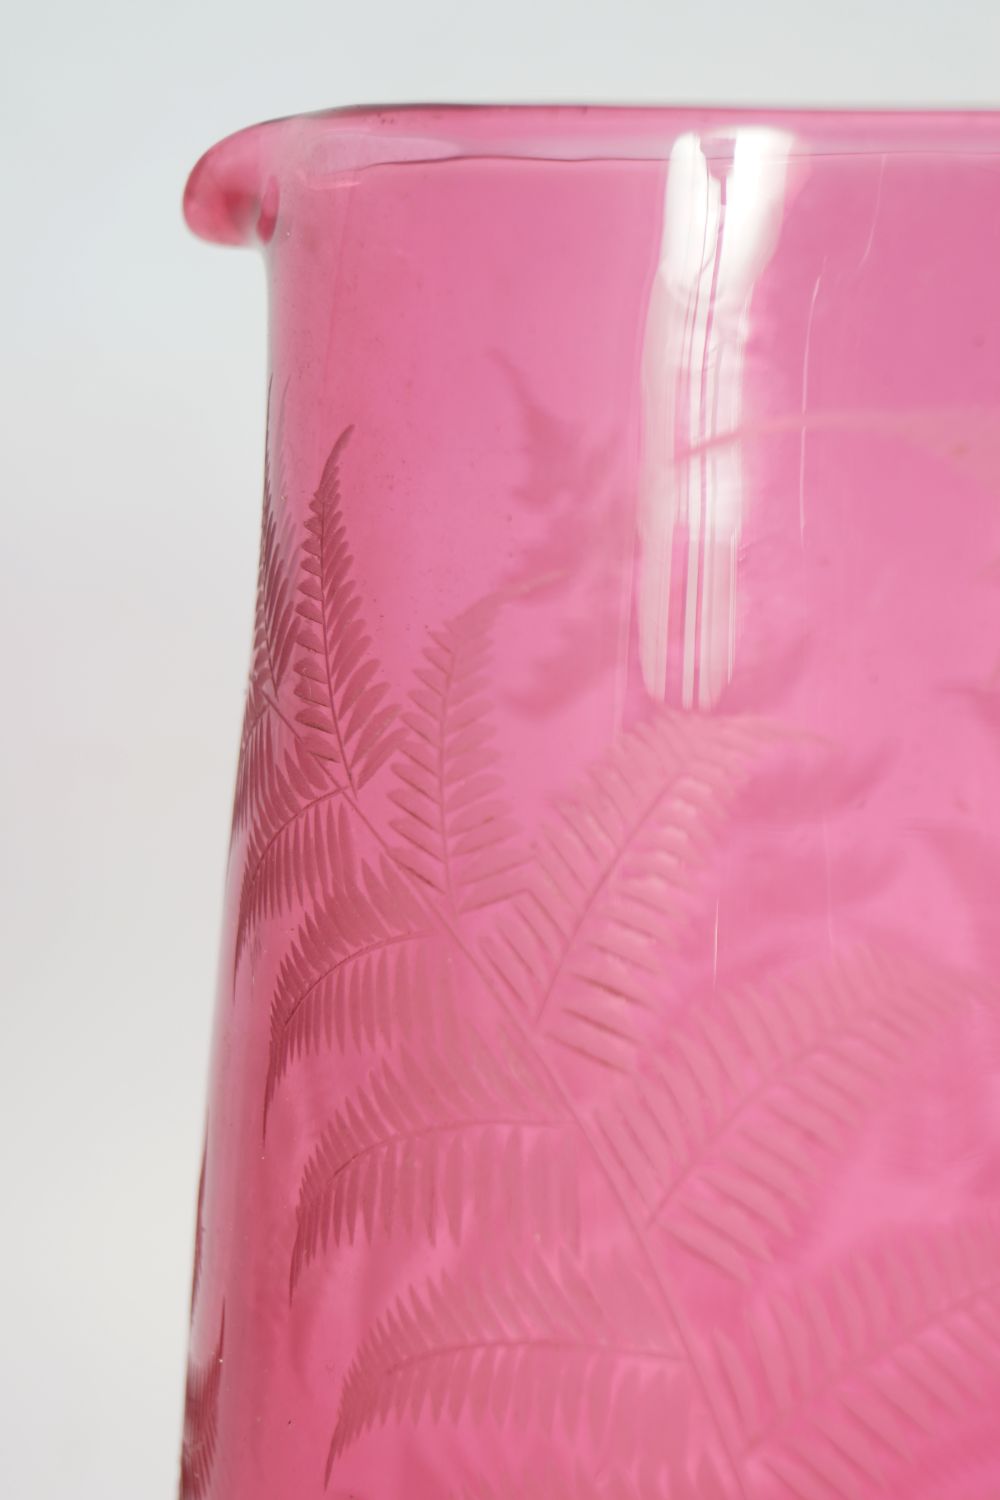 19TH-CENTURY CRANBERRY GLASS JUG - Image 3 of 3